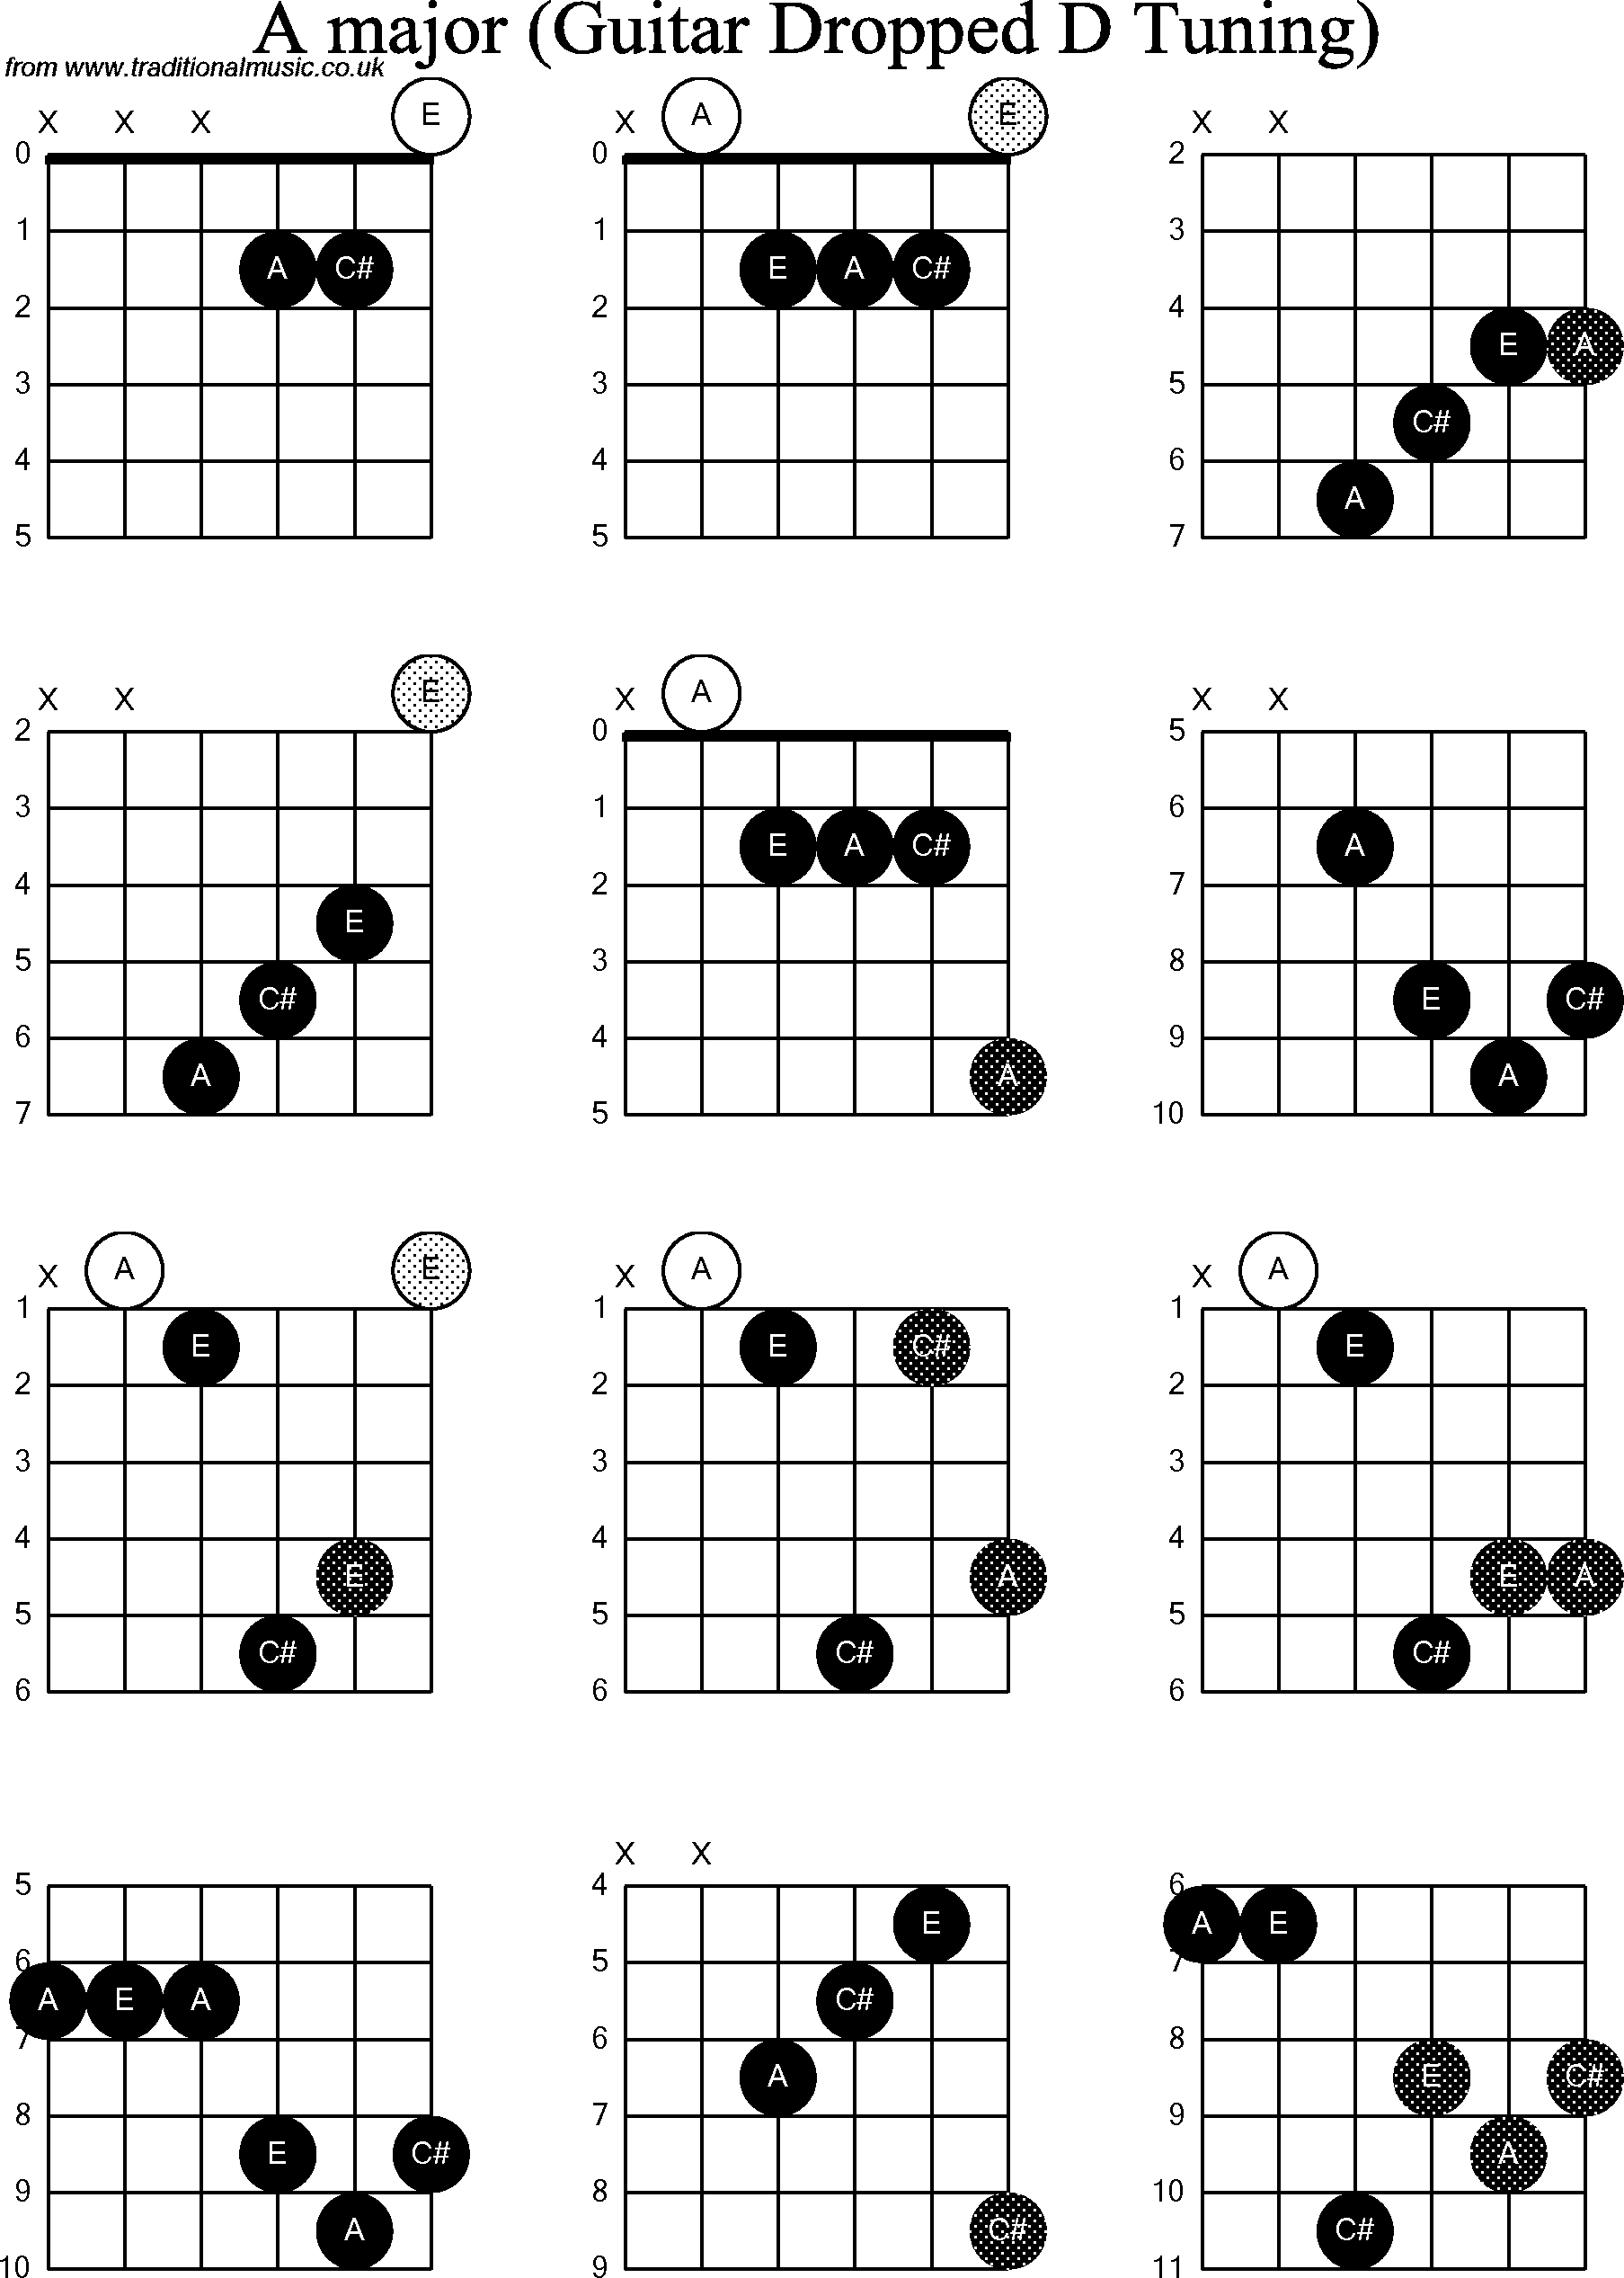 Chord diagrams for dropped D Guitar(DADGBE), A